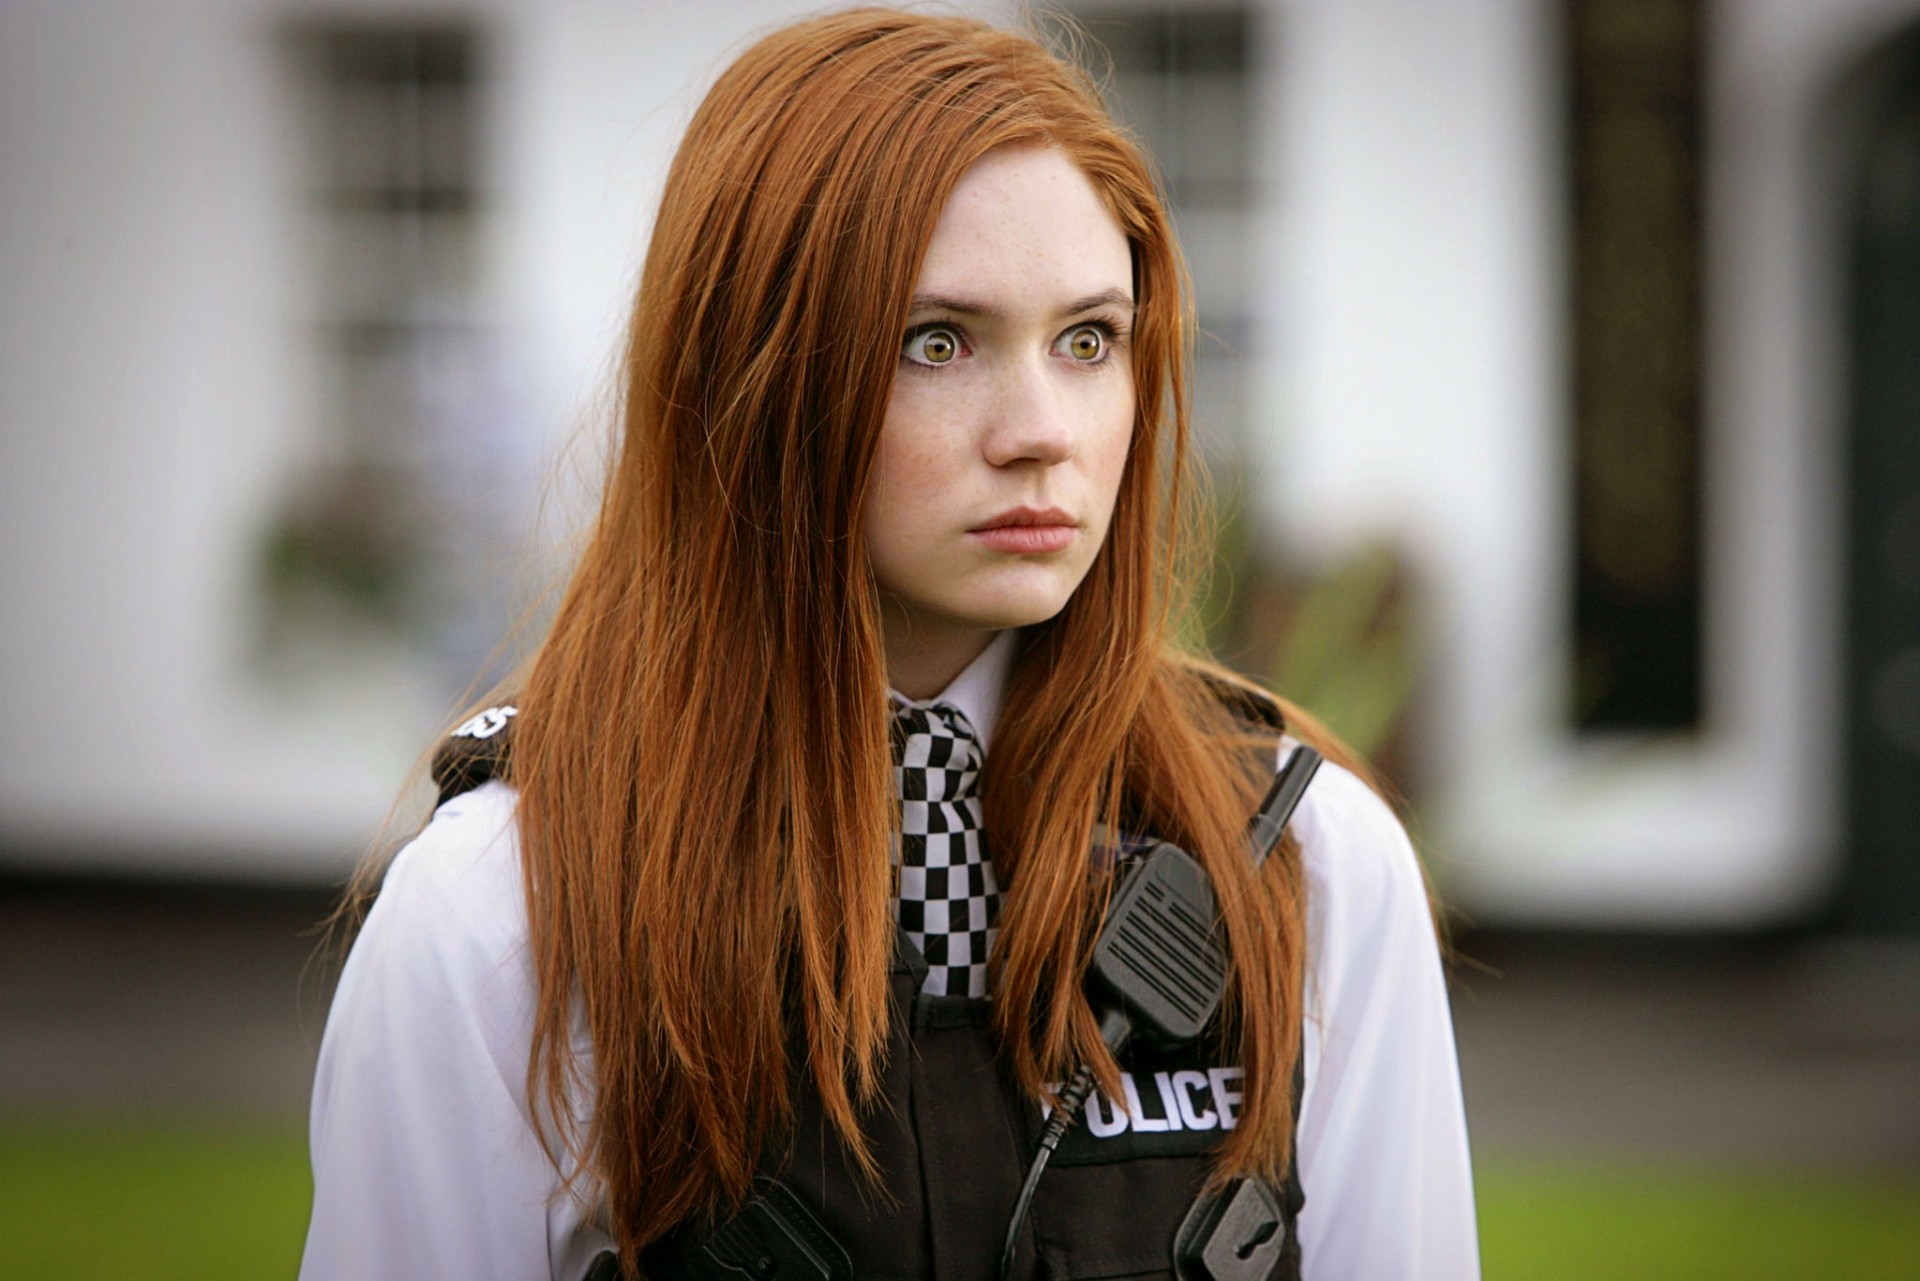 Wallpaper, police, women, redhead, model, long hair, glasses, fashion, British, Karen Gillan, Doctor Who, Person, girl, beauty, woman, lady, blond, hairstyle, portrait photography, photo shoot, brown hair, human hair color 1920x1281